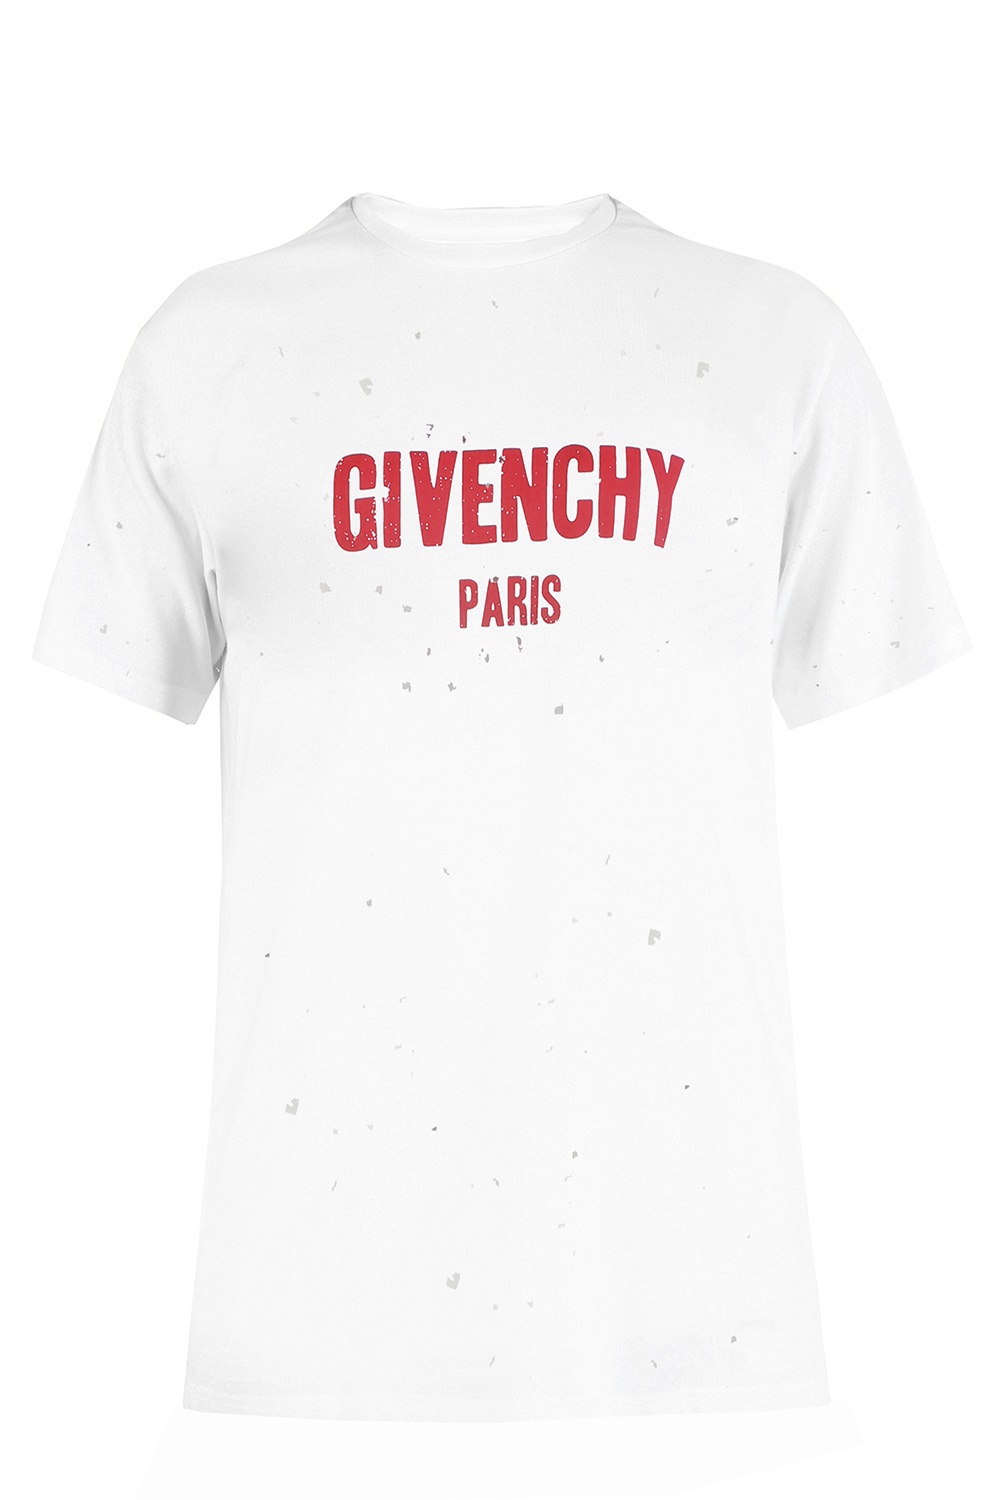 givenchy t shirt with holes